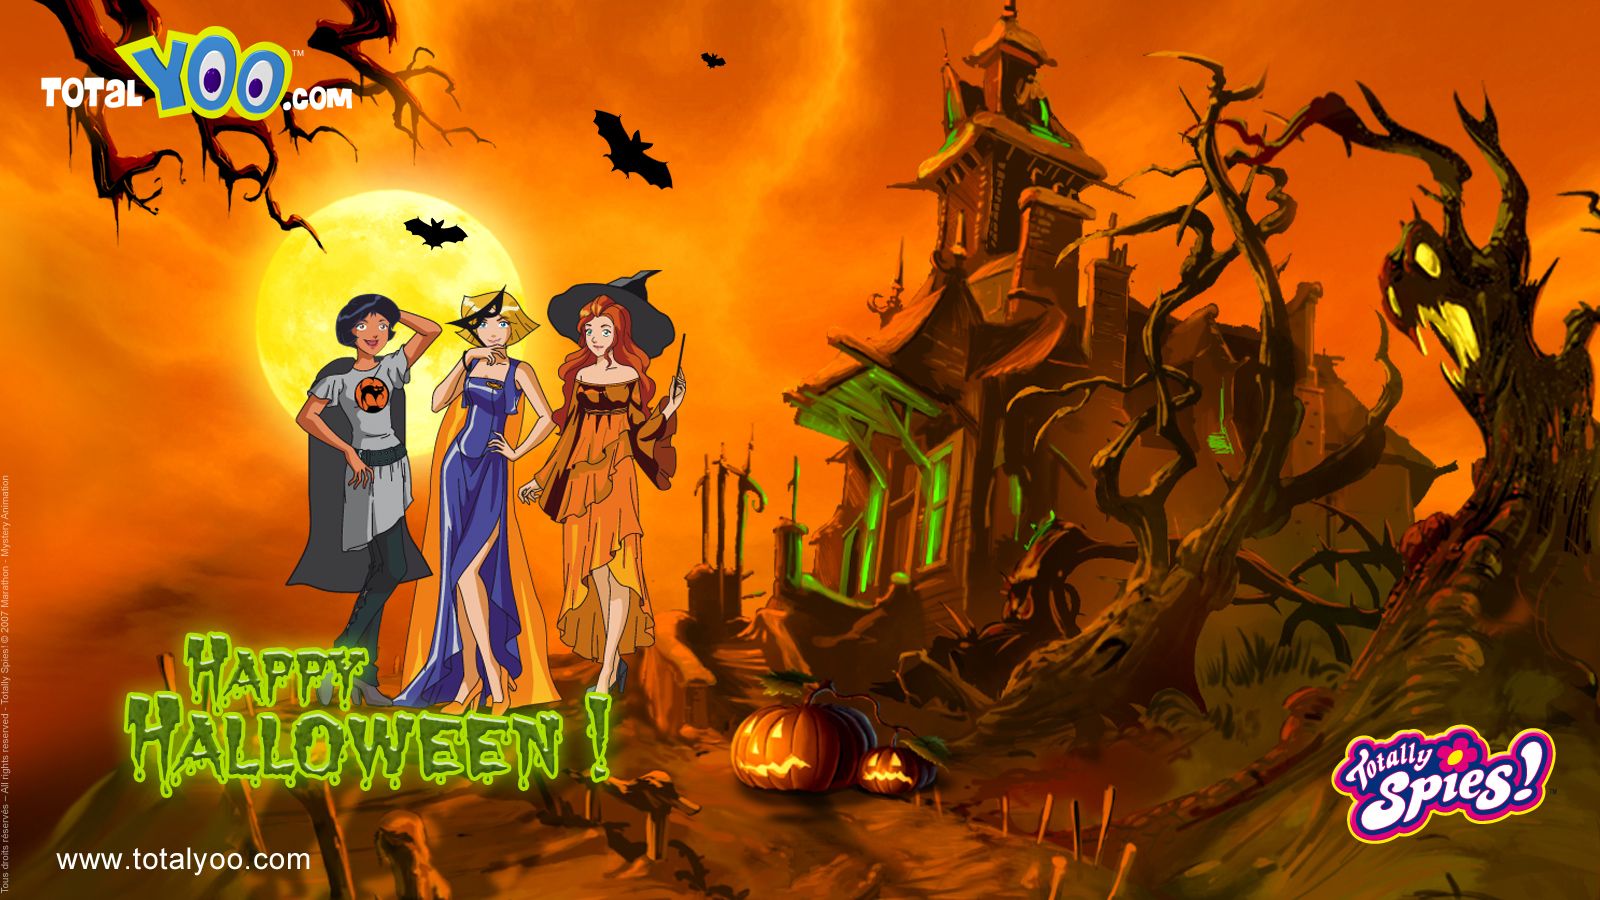 Totally Spies Halloween Wallpapers TotalYOO